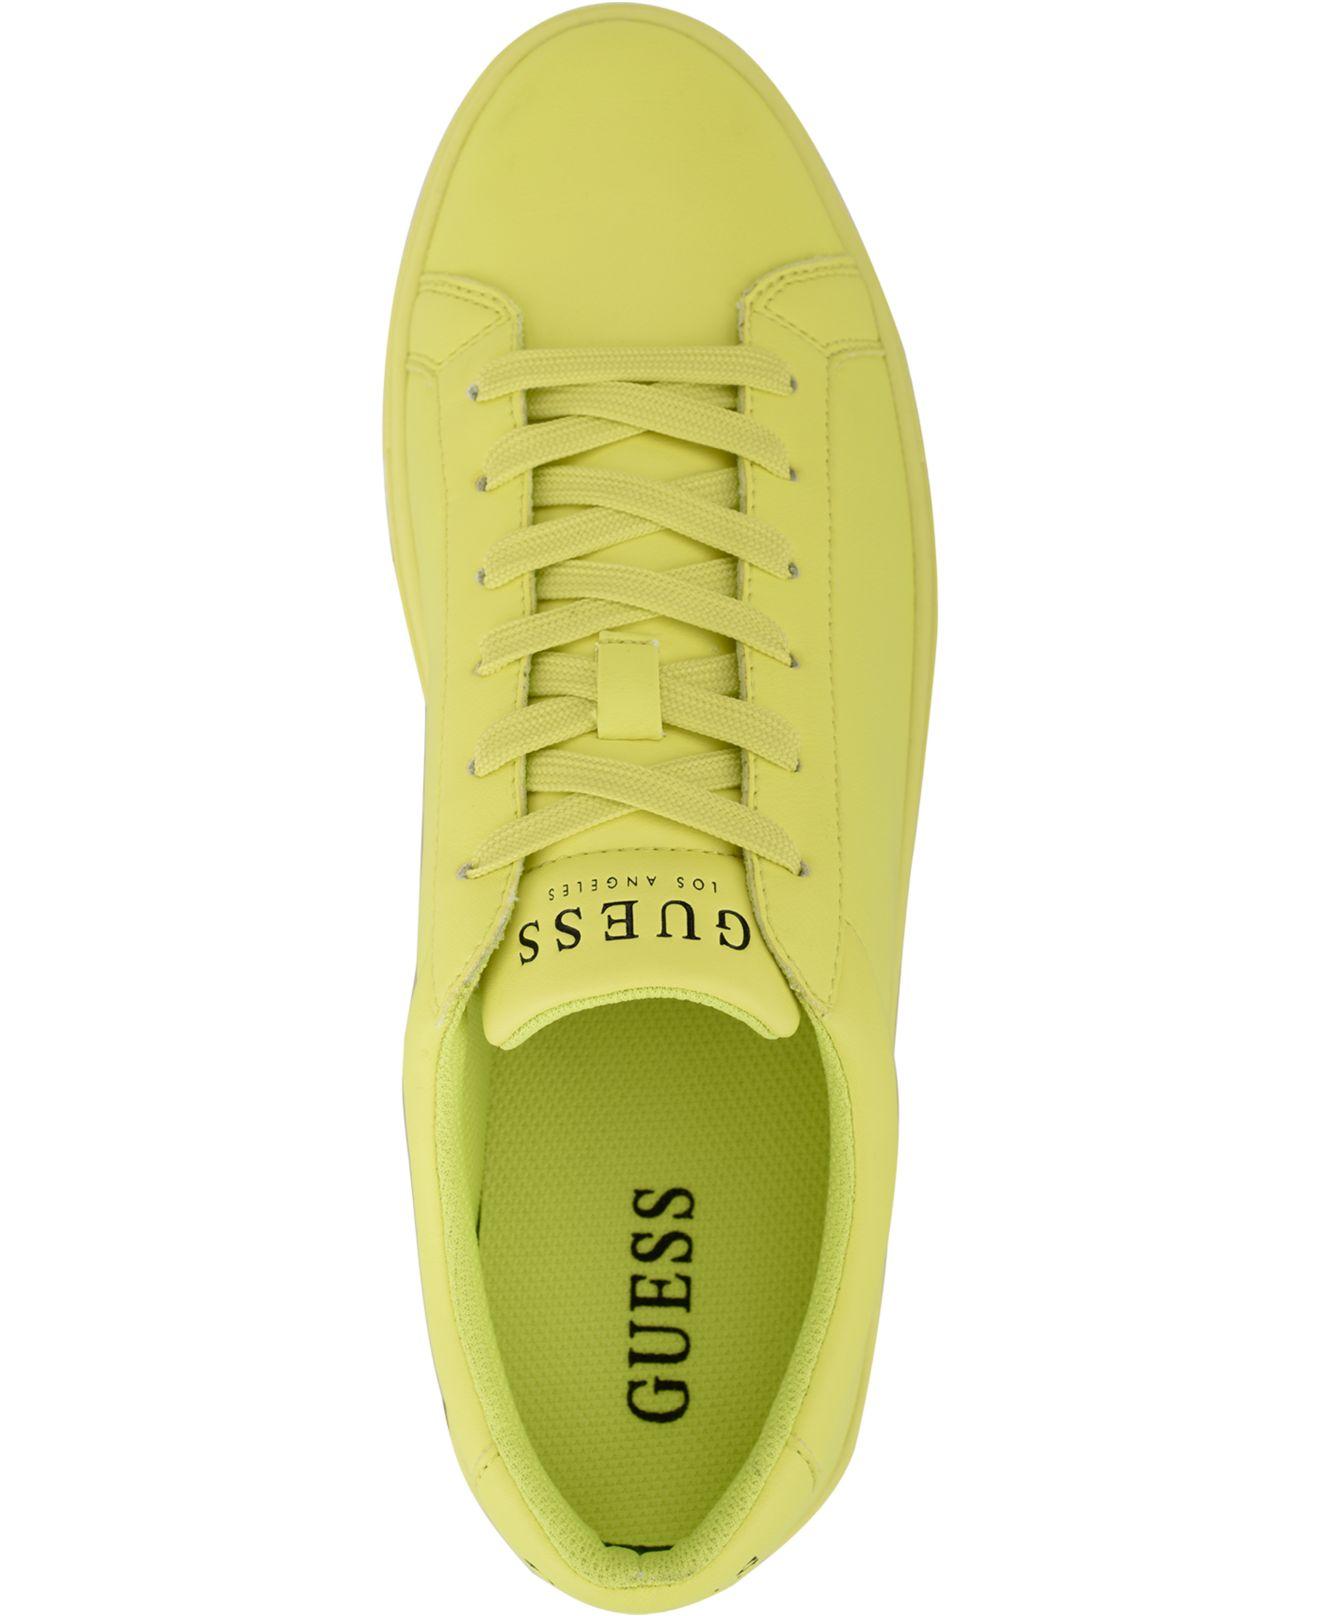 Guess Synthetic Batrix Sneakers in Neon Yellow (Yellow) for Men - Lyst